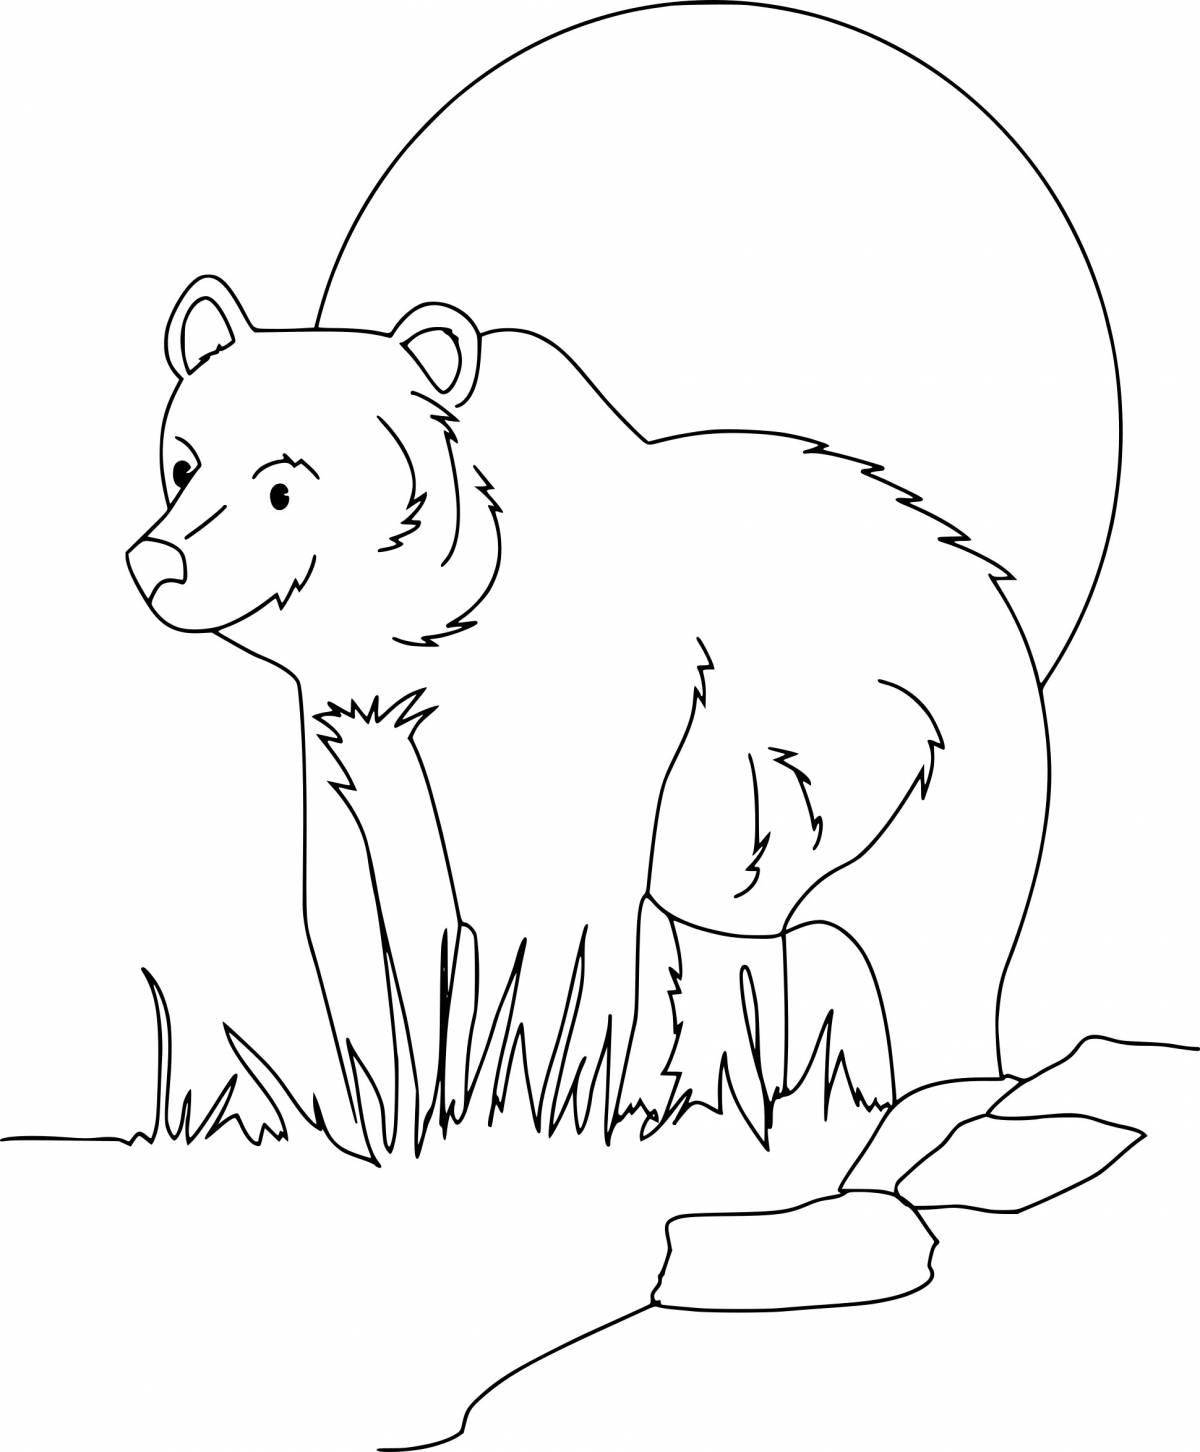 Teddy bear coloring book for 4-5 year olds